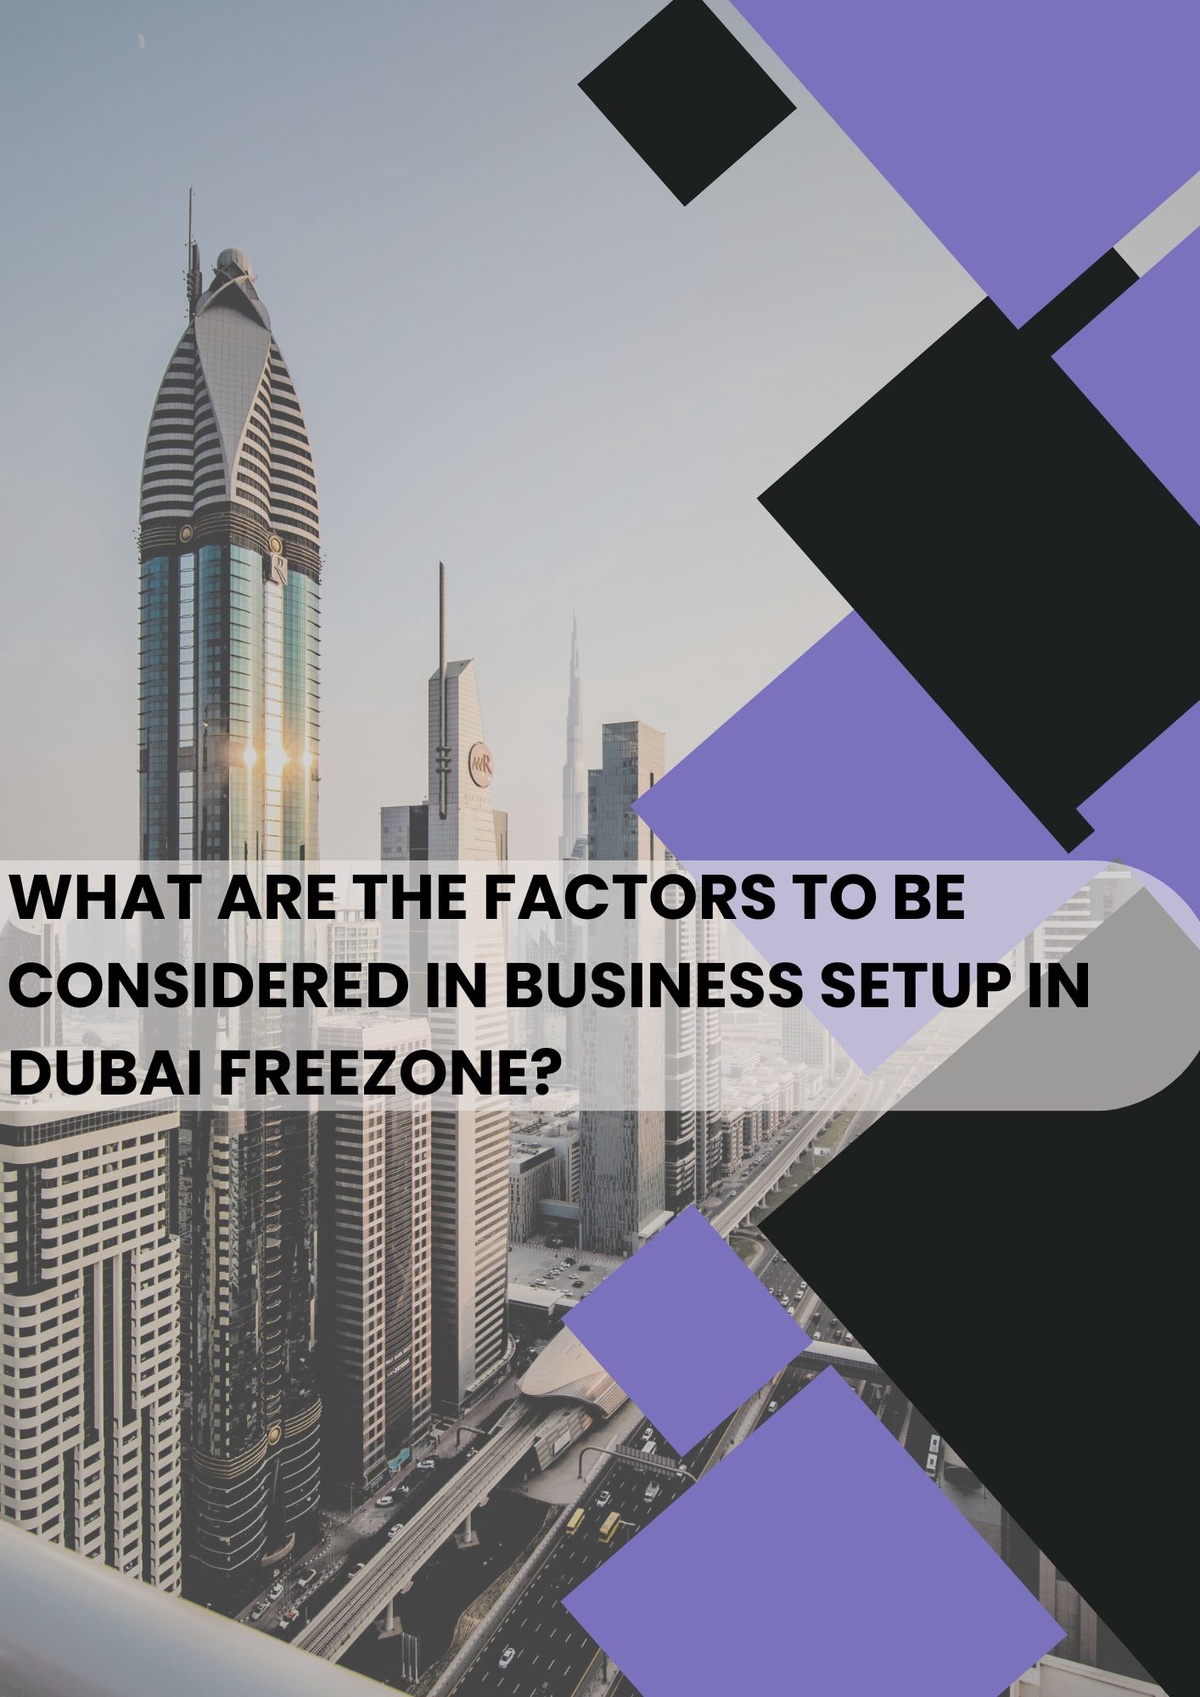 What are the factors to be considered in business setup in Dubai freezone?